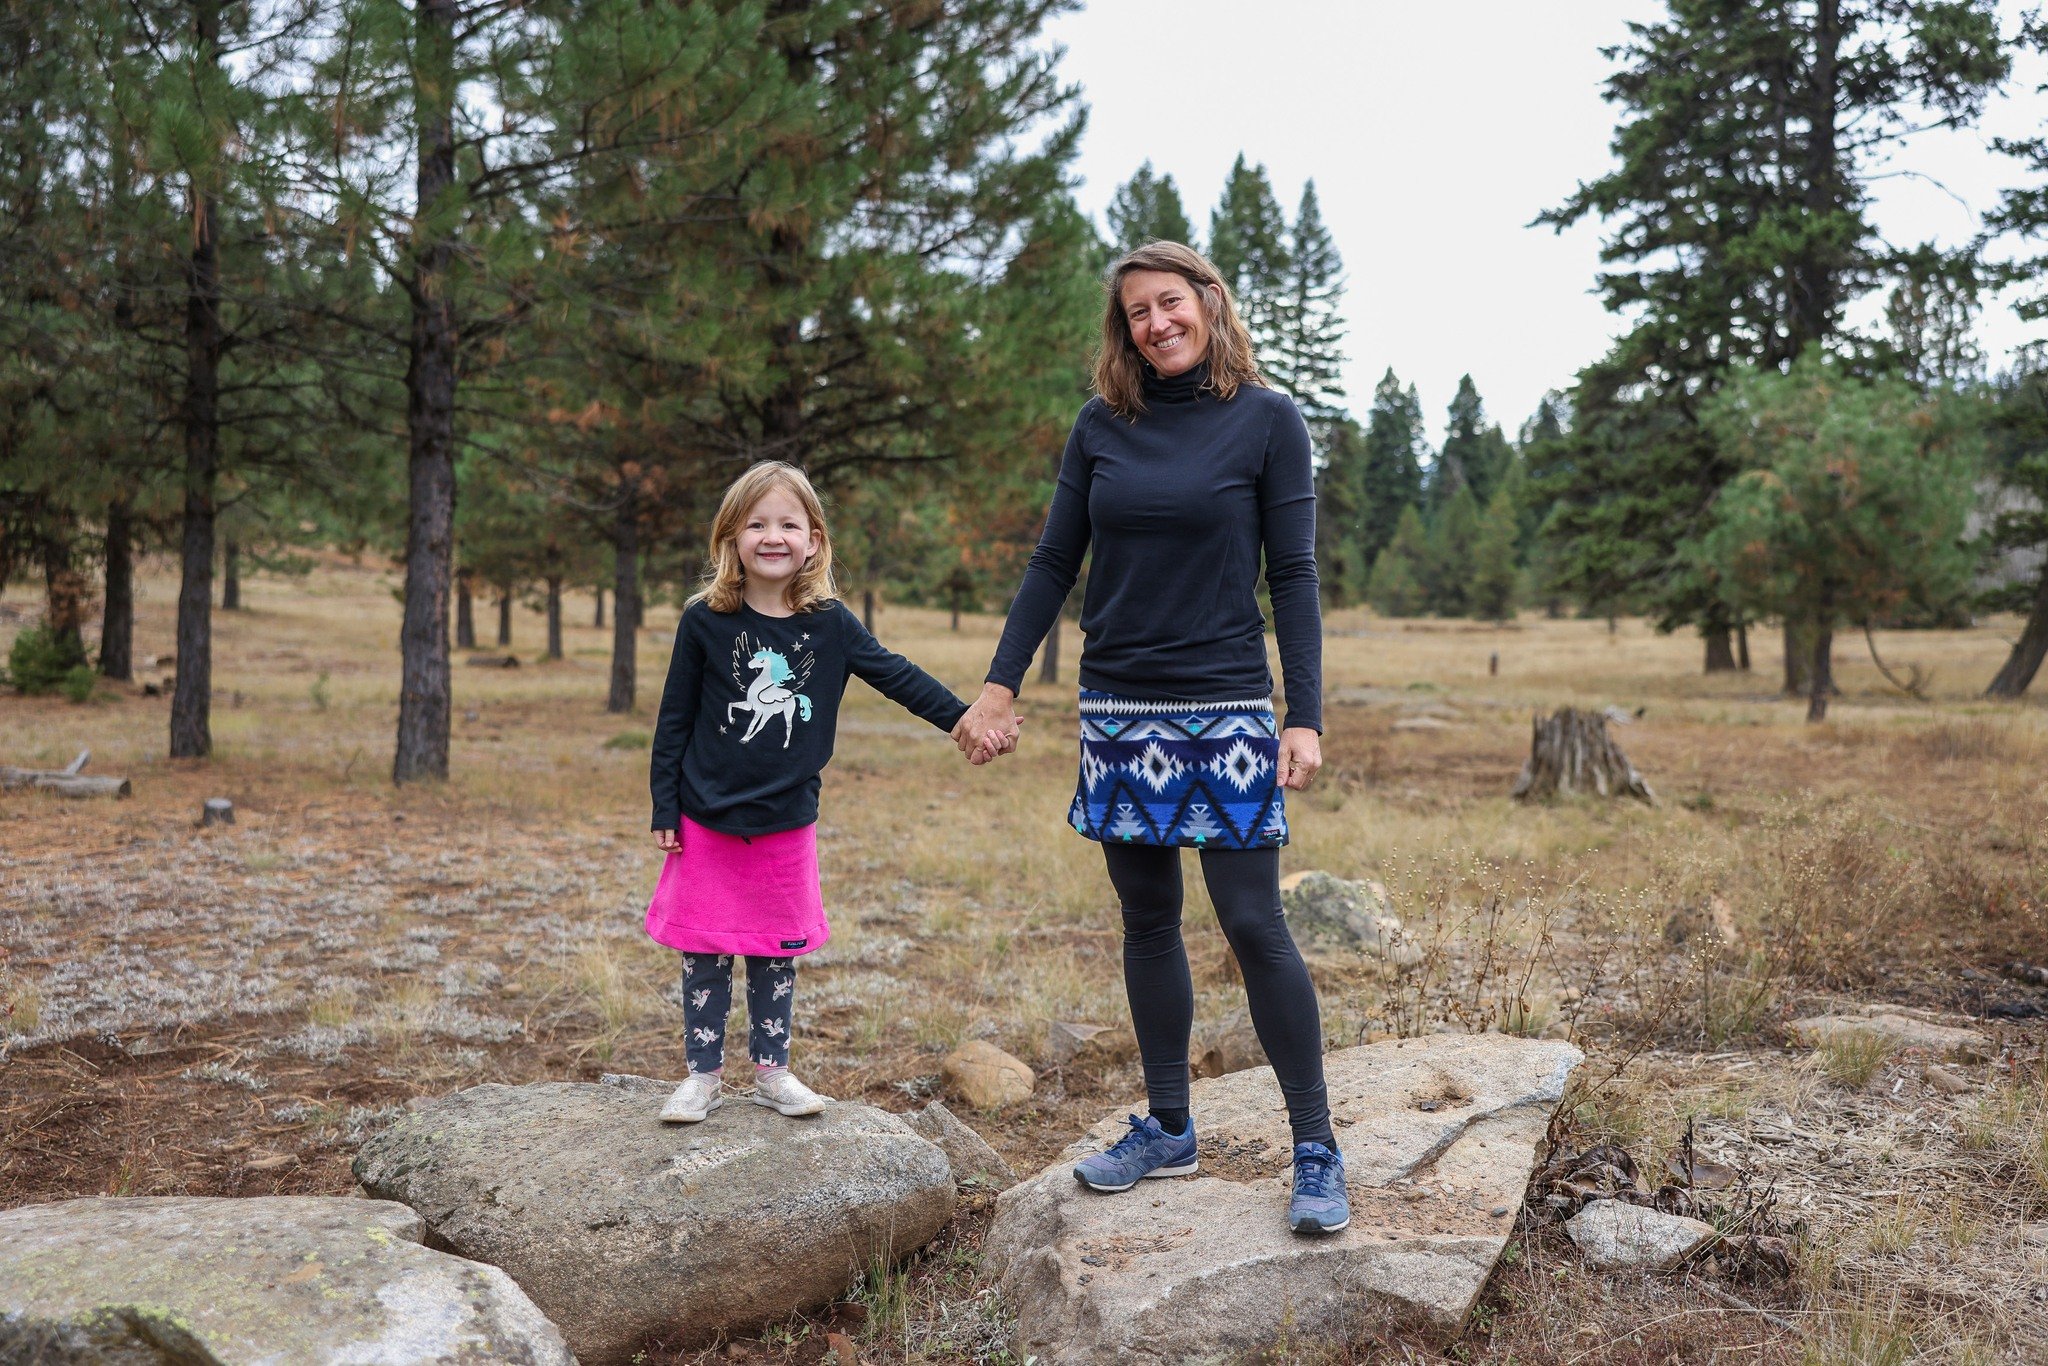 Mother's Day is less than a week away!  Show your Momma some love by gifting her a new FunLuvin' Skirt! 

Our entire website is on sale for the next week.  Enter code LOVEYOURMOMMA at checkout for 20% your order!. 

We can even include a special note